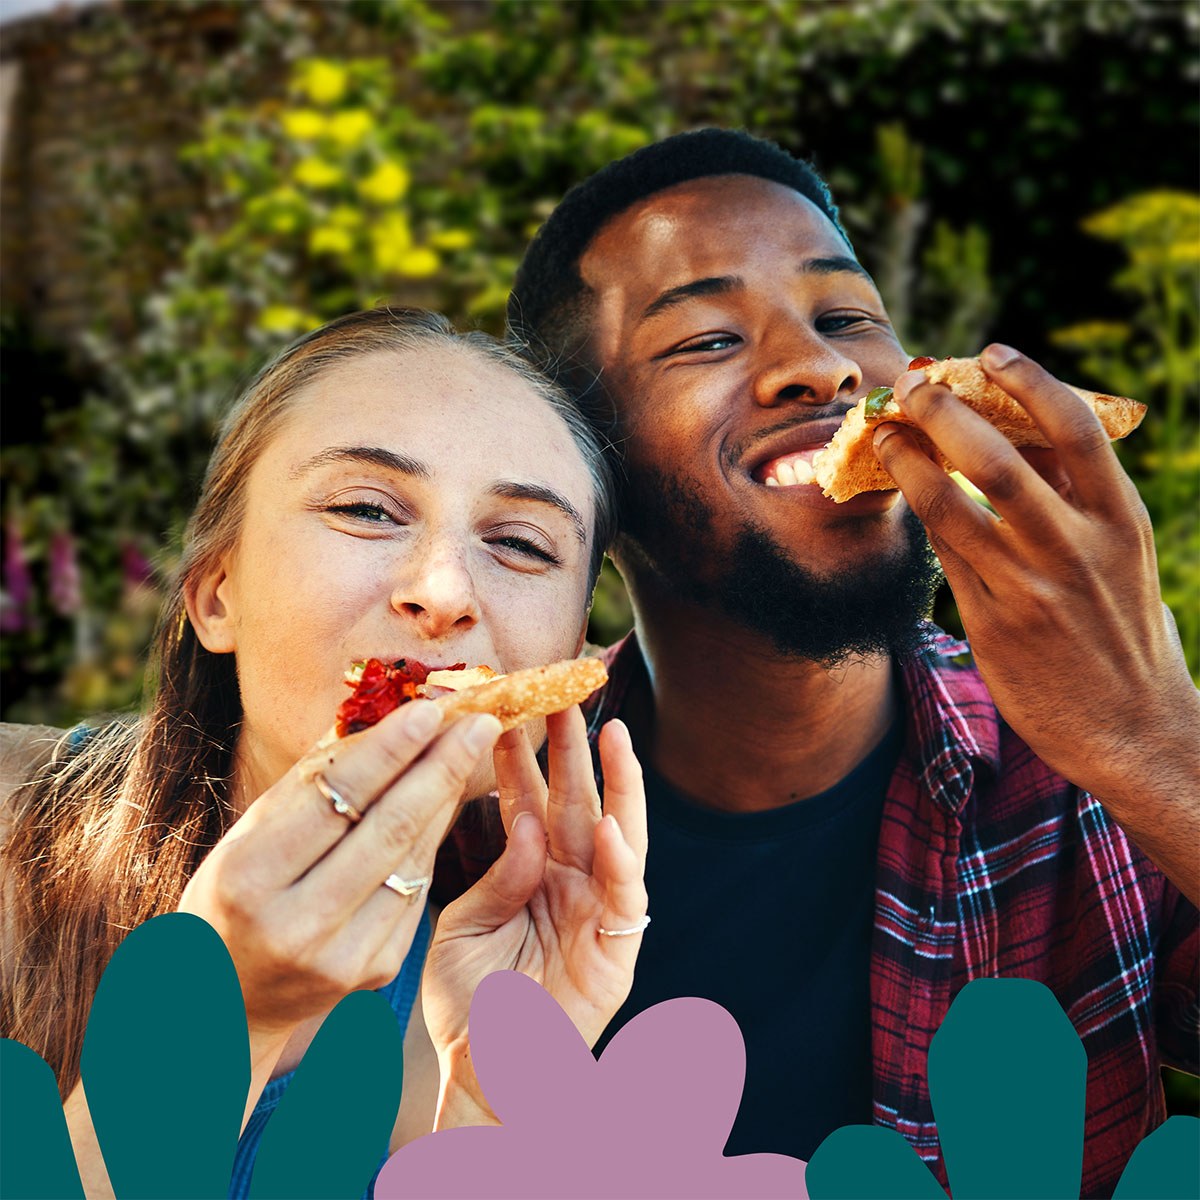 A pair of people eating pizza while smiling for the camera, in a garden setting.